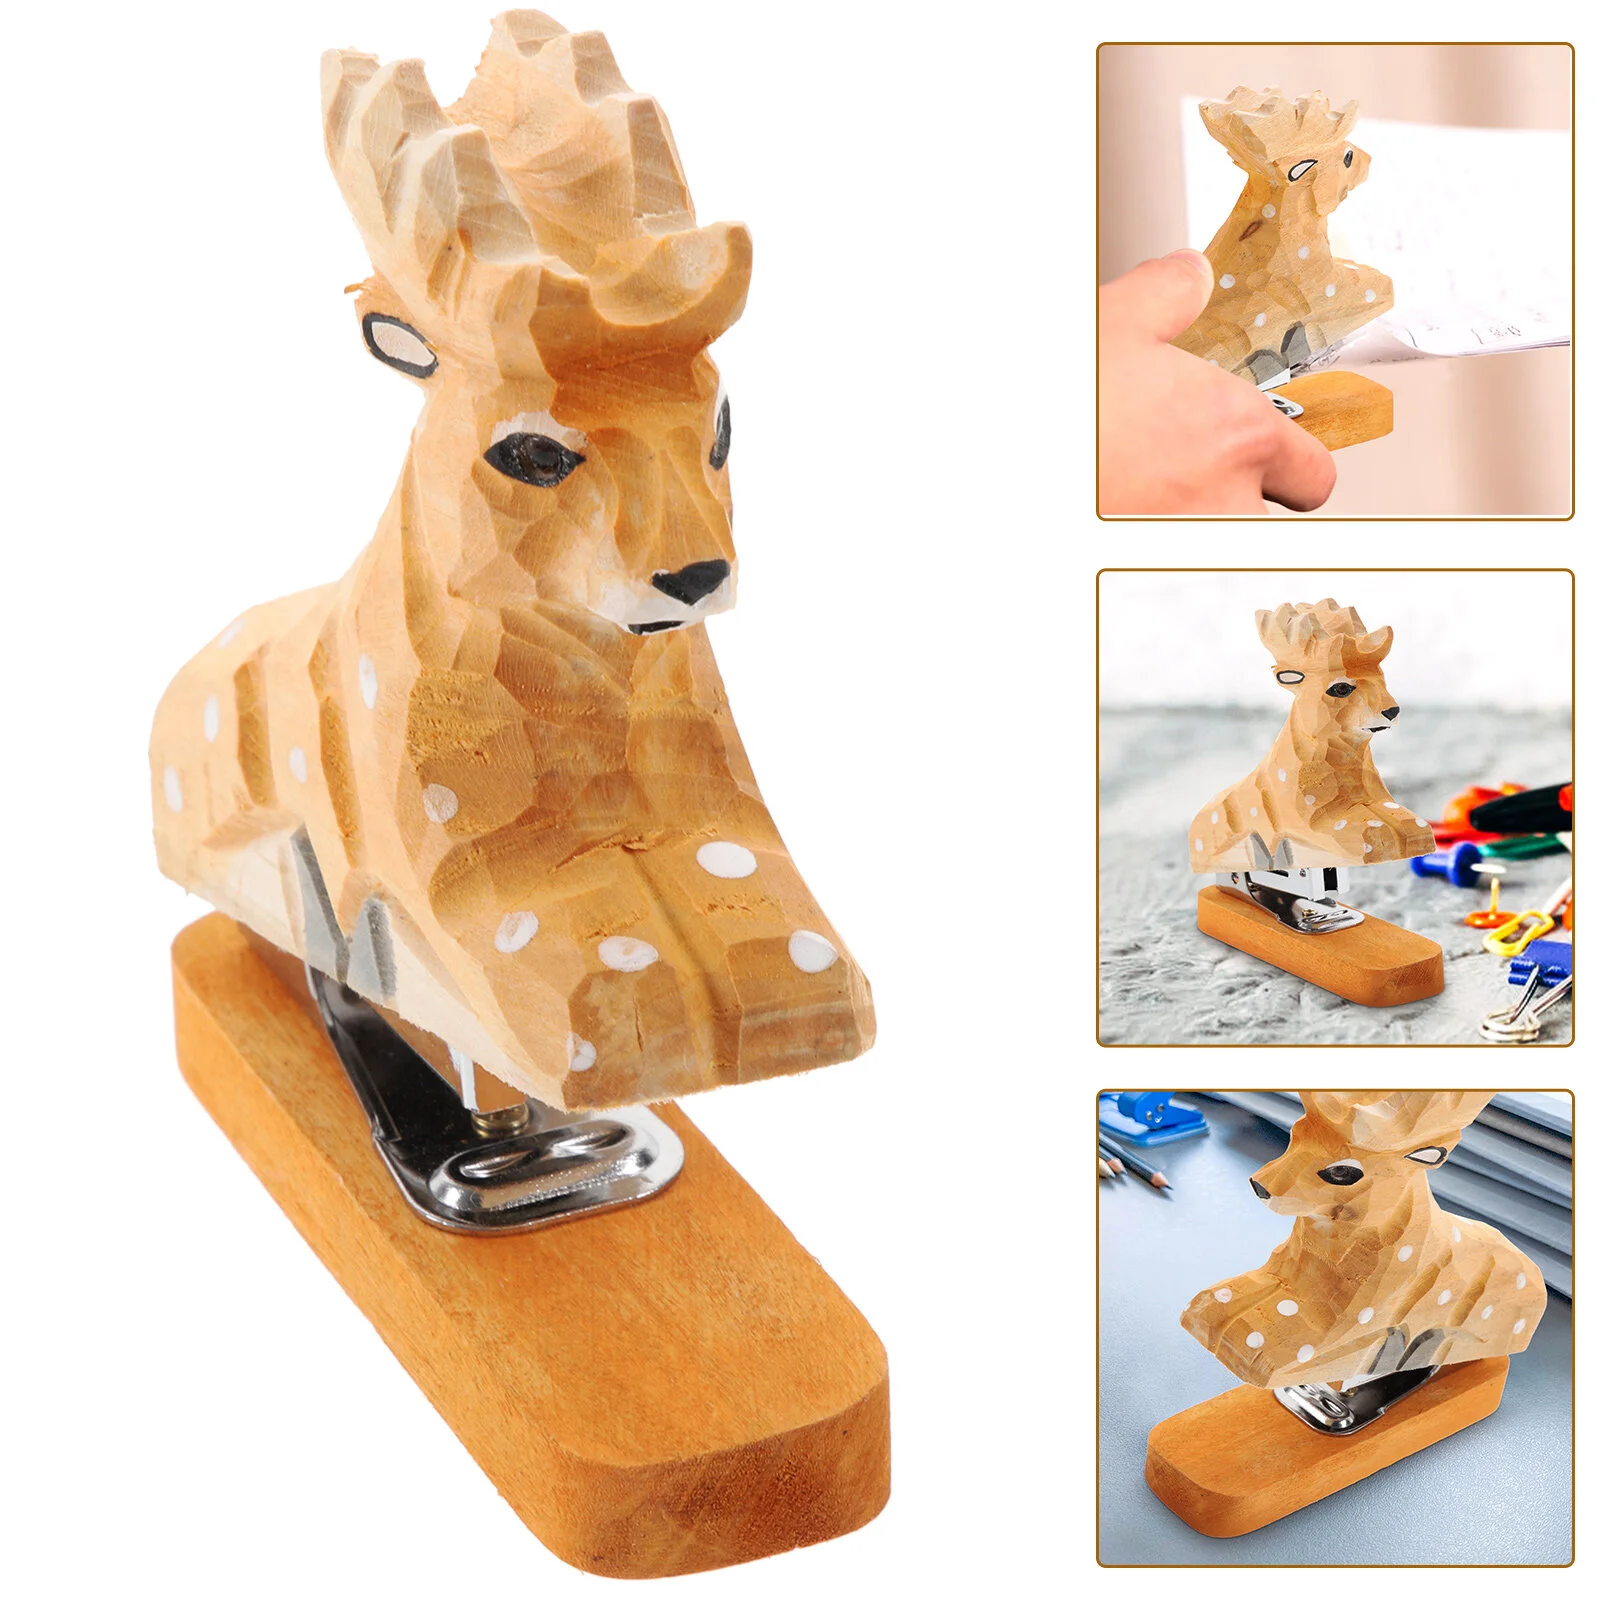 

Animal Stapler Desk Stuff Fun Office Supplies Stationery Funny Gift Adorable Home Wood Workspace Organizers